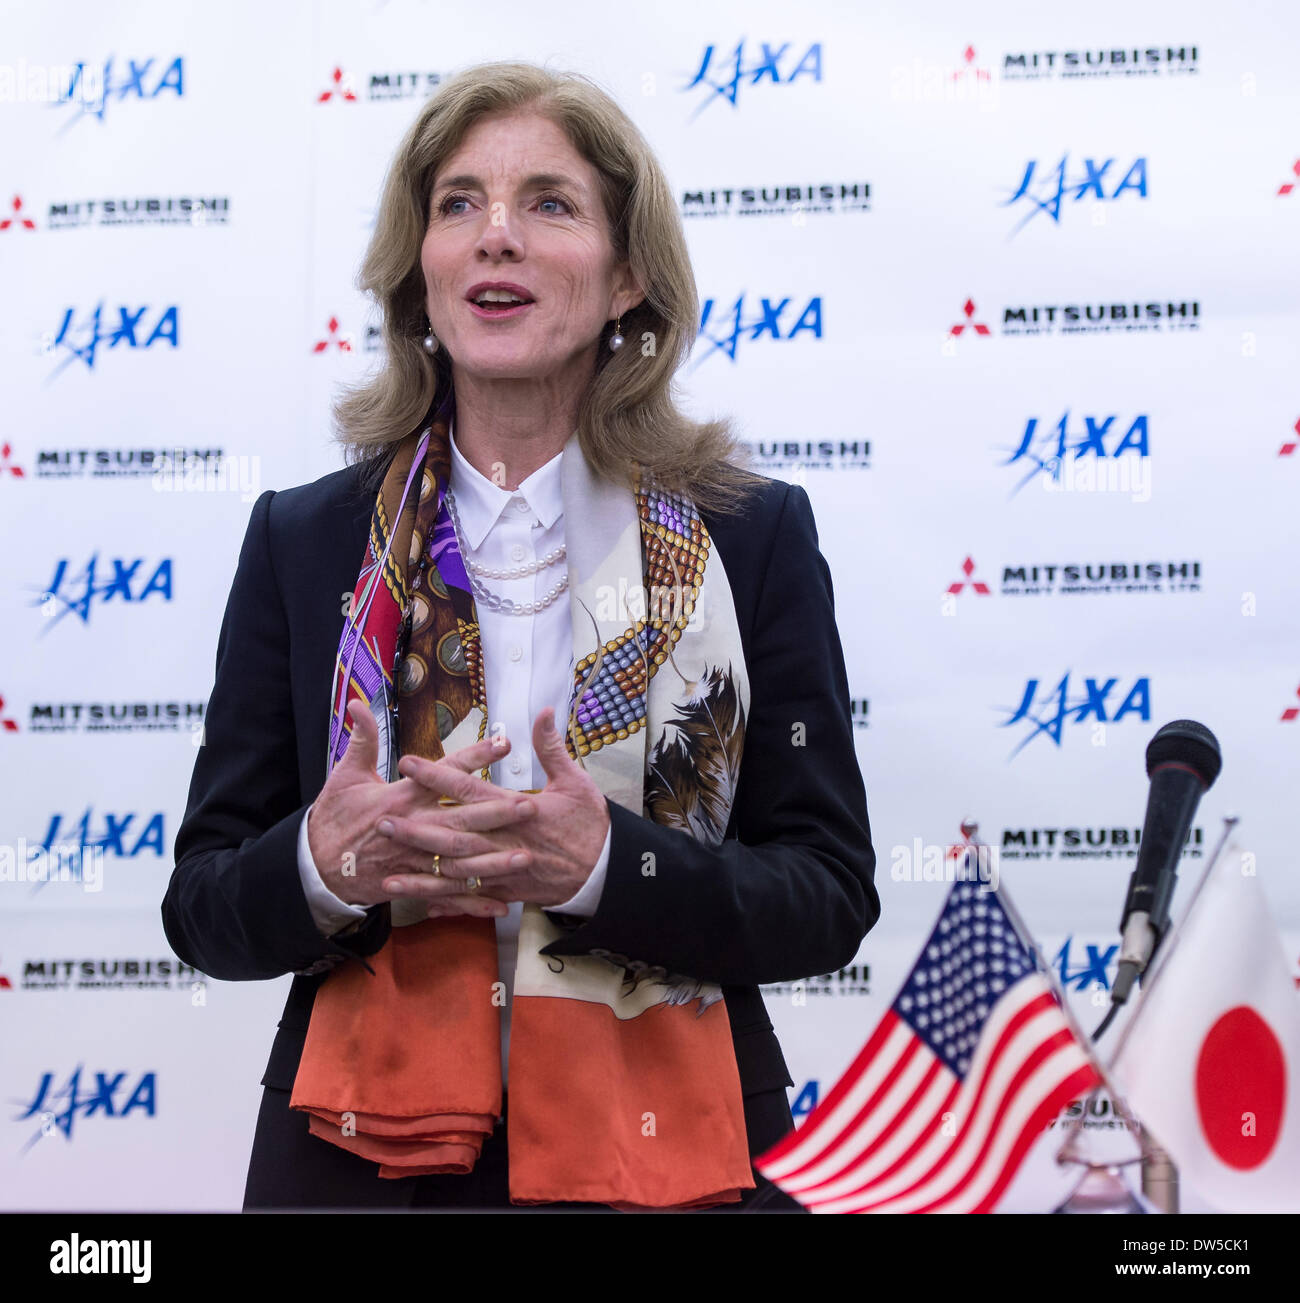 US Ambassador to Japan, Caroline Kennedy, congratulates Japanese and American scientists after a successful launch of the Japan Aerospace Exploration Agency H-IIA rocket carrying the NASA-JAXA Global Precipitation Measurement Core Observatory satellite from the Tanegashima Space Center February 28, 2014 in Tanegashima, Japan. The GPM spacecraft will collect information that unifies data from an international network of existing and future satellites to map global rainfall and snowfall every three hours. Stock Photo